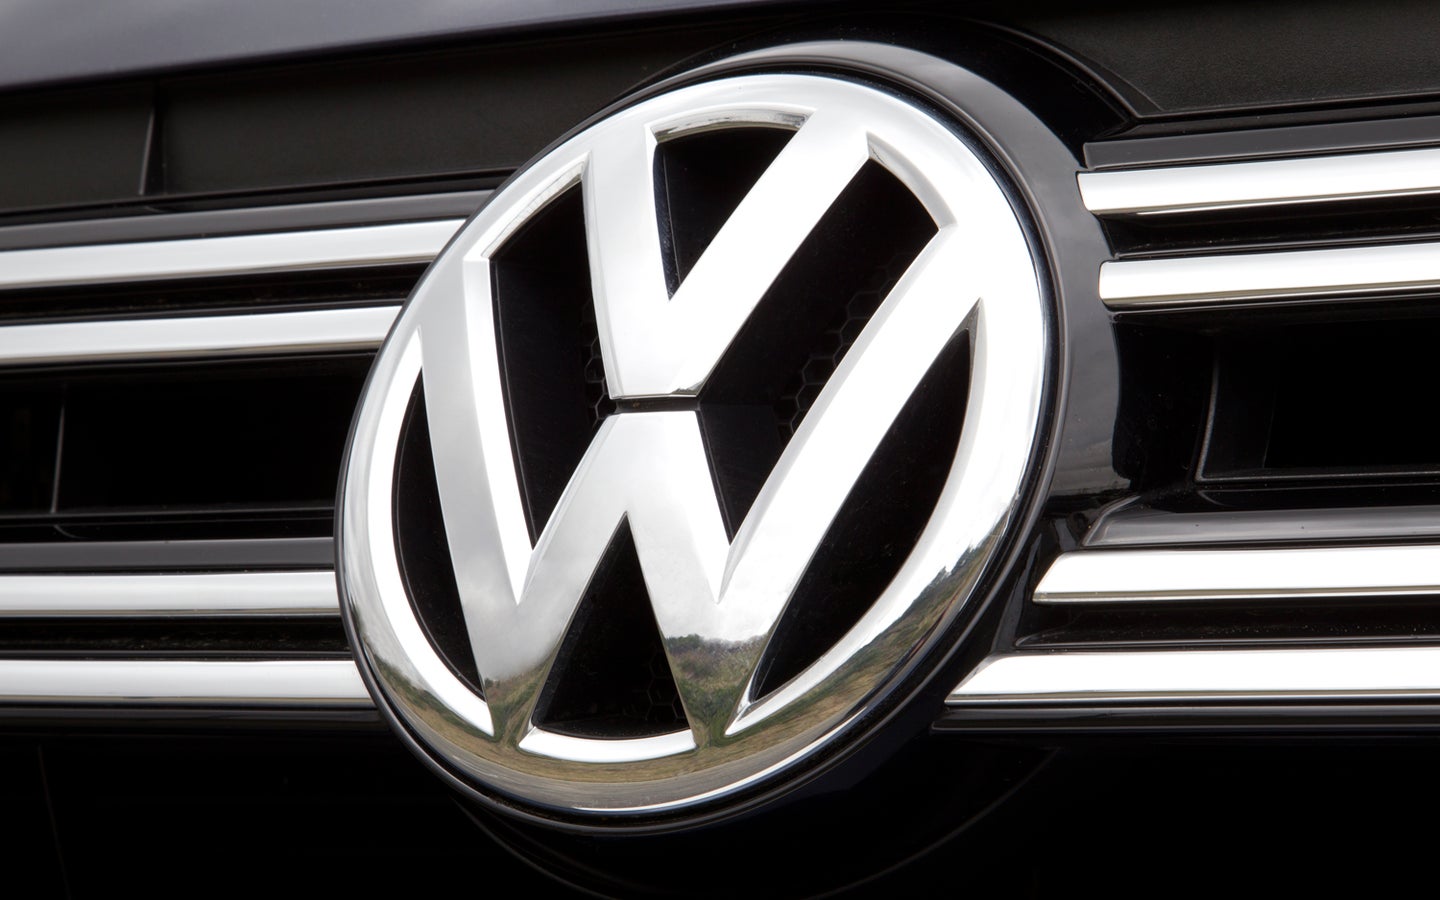 Volkswagen Accepts Charges for Dieselgate, Could End Up Paying $25 Billion.